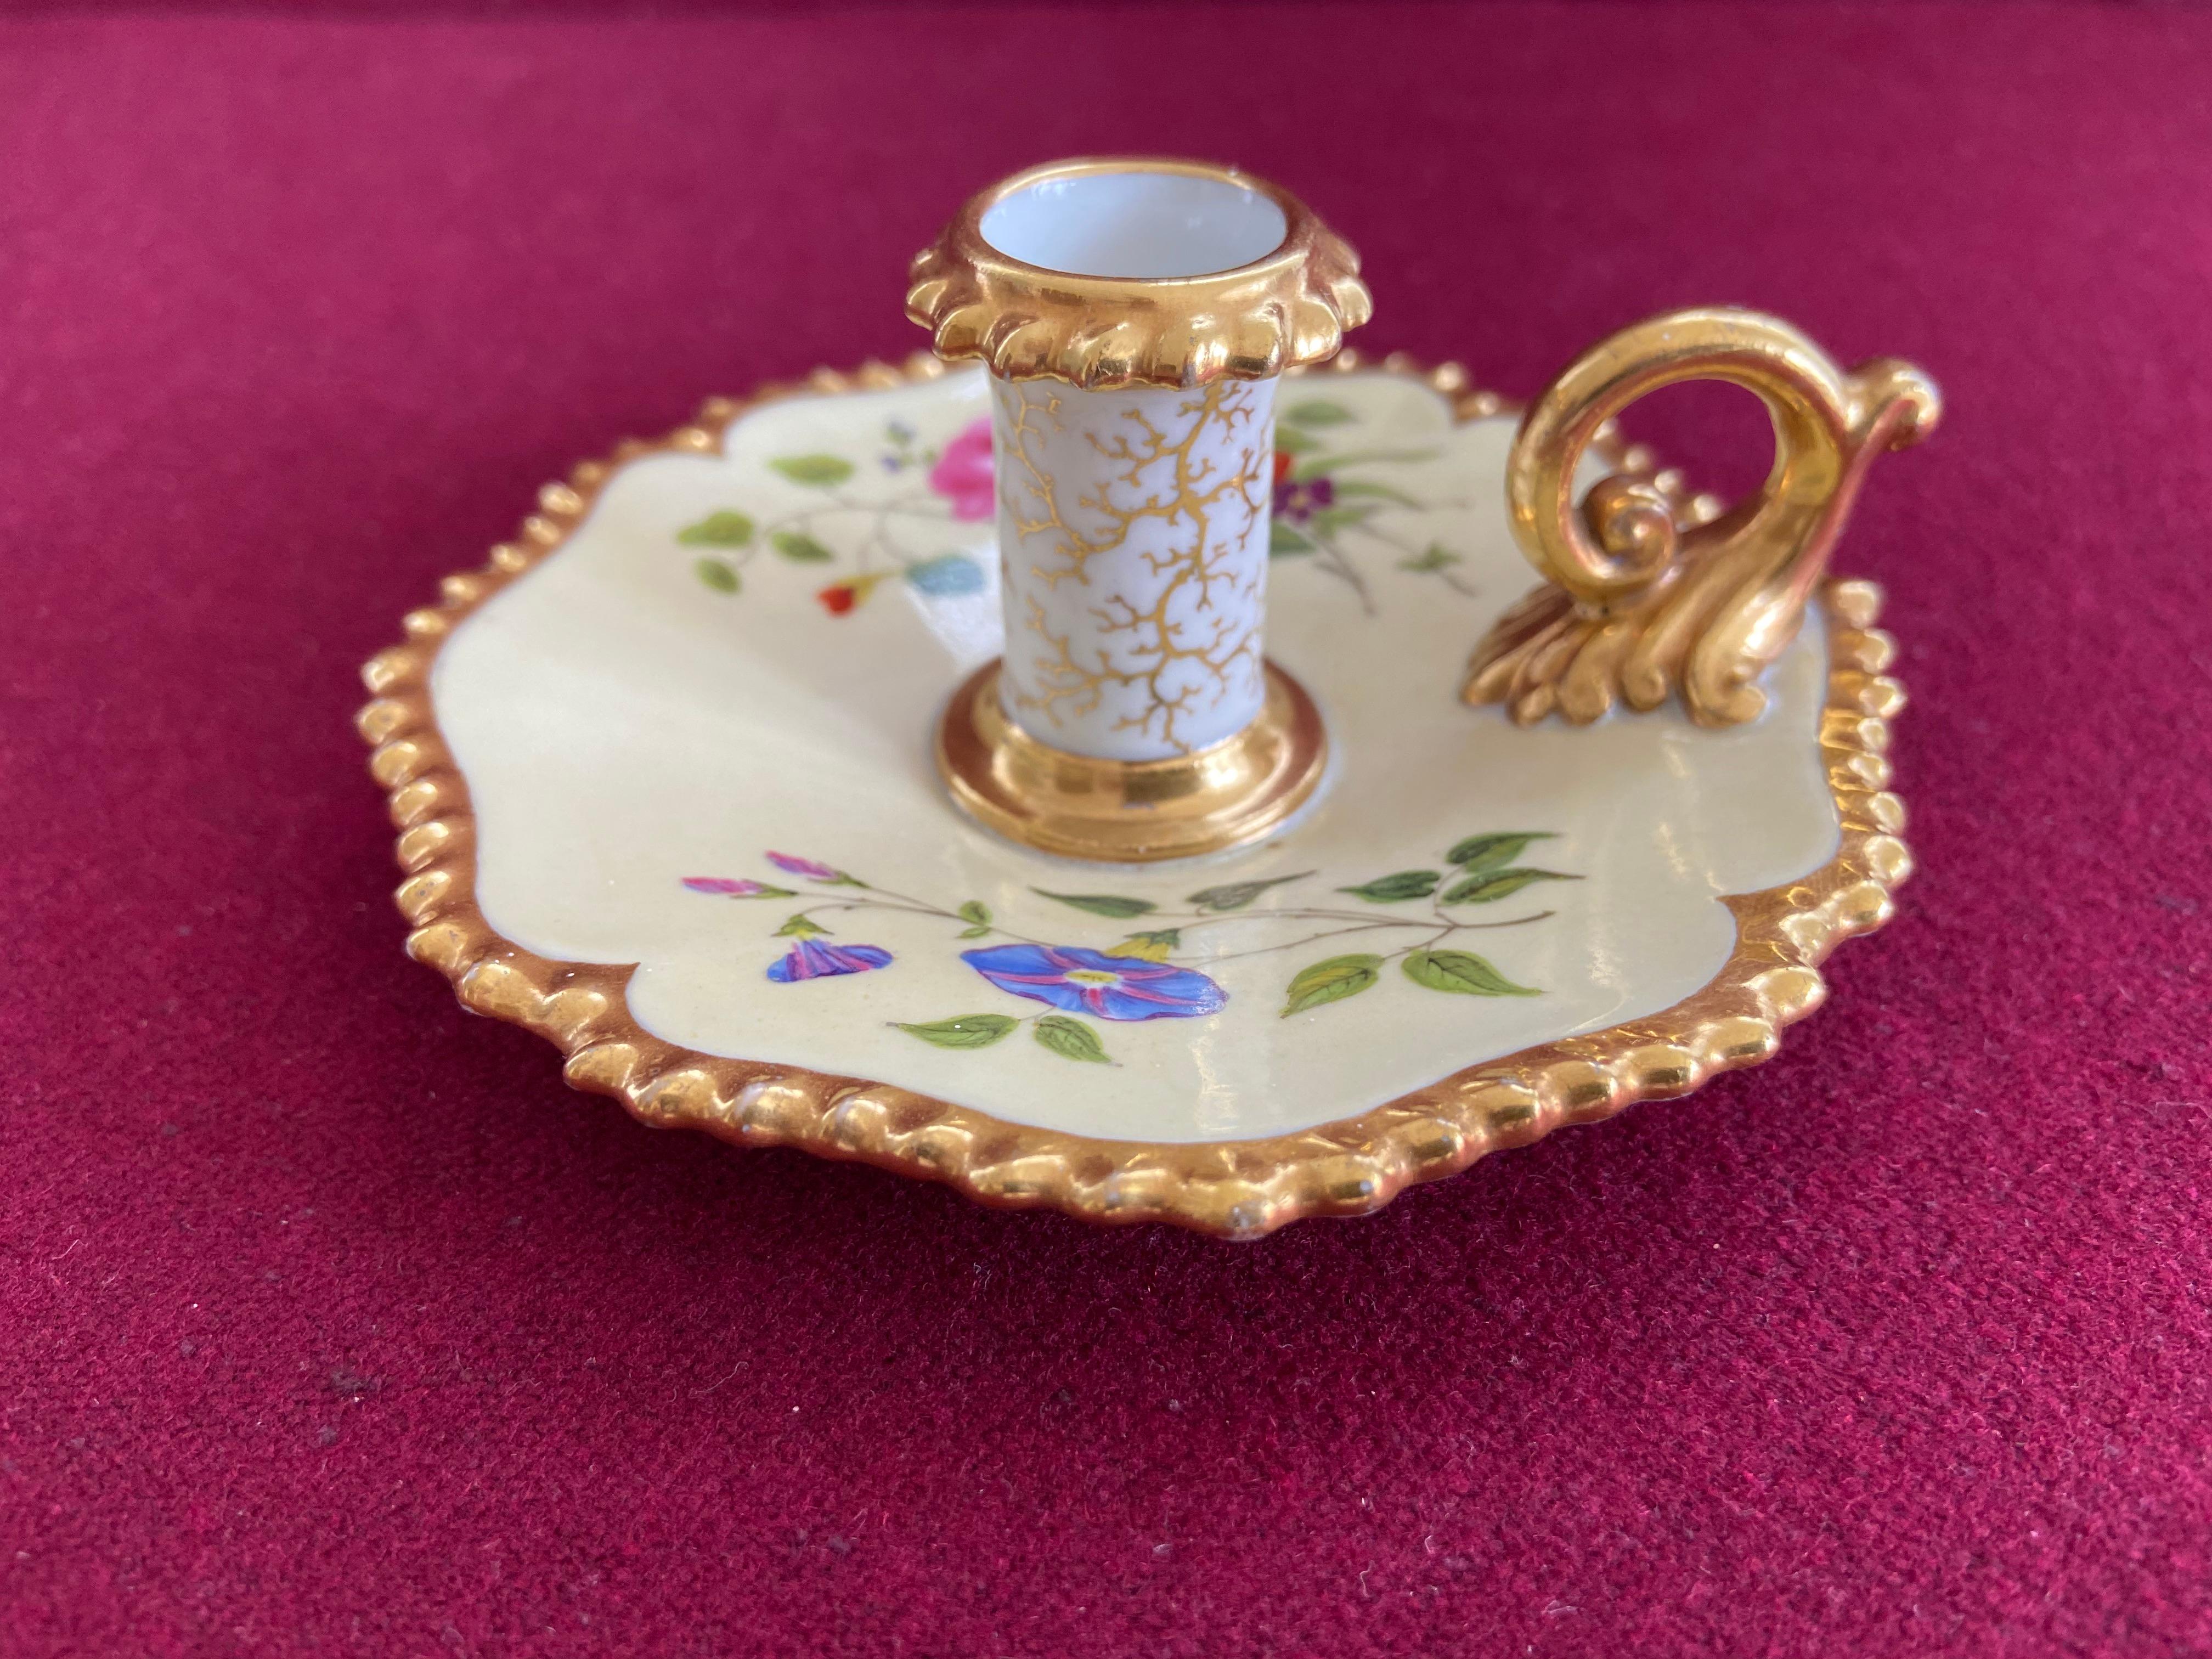 A small Flight Barr and Barr Worcester chamberstick c.1820-30. Decorated with finely painted flowers on a pale yellow ground. Printed mark in crimson to the base 'Royal porcelain Works, Flight Barr & Barr Worcester & Coventry St. London'.

The